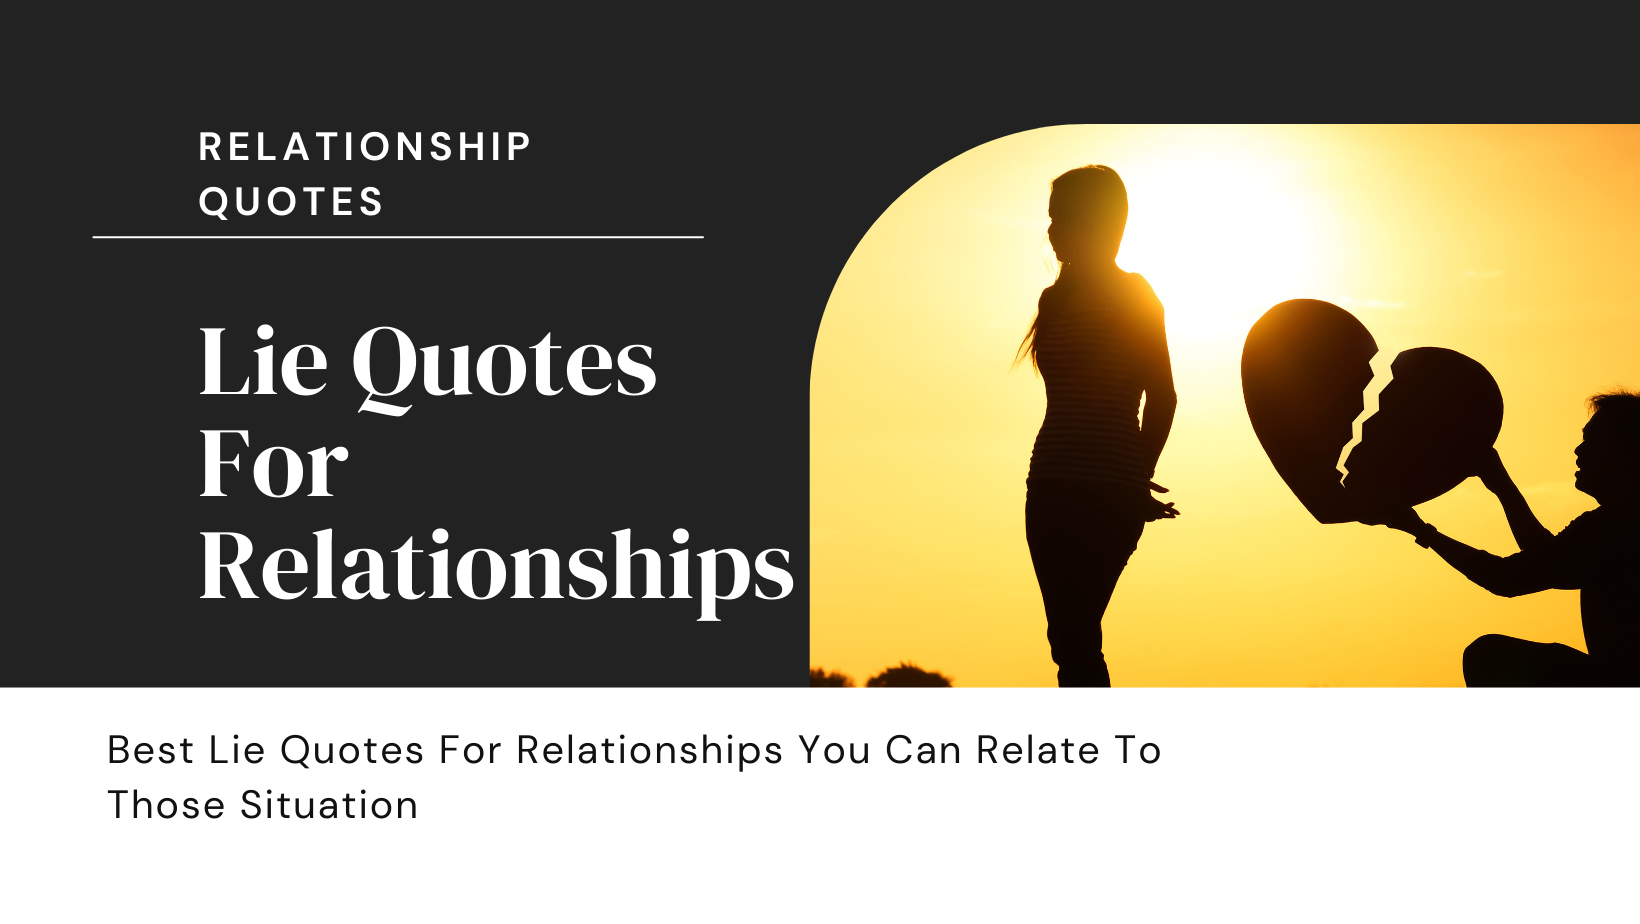 Best Lie Quotes For Relationships You Can Relate To Those Situation